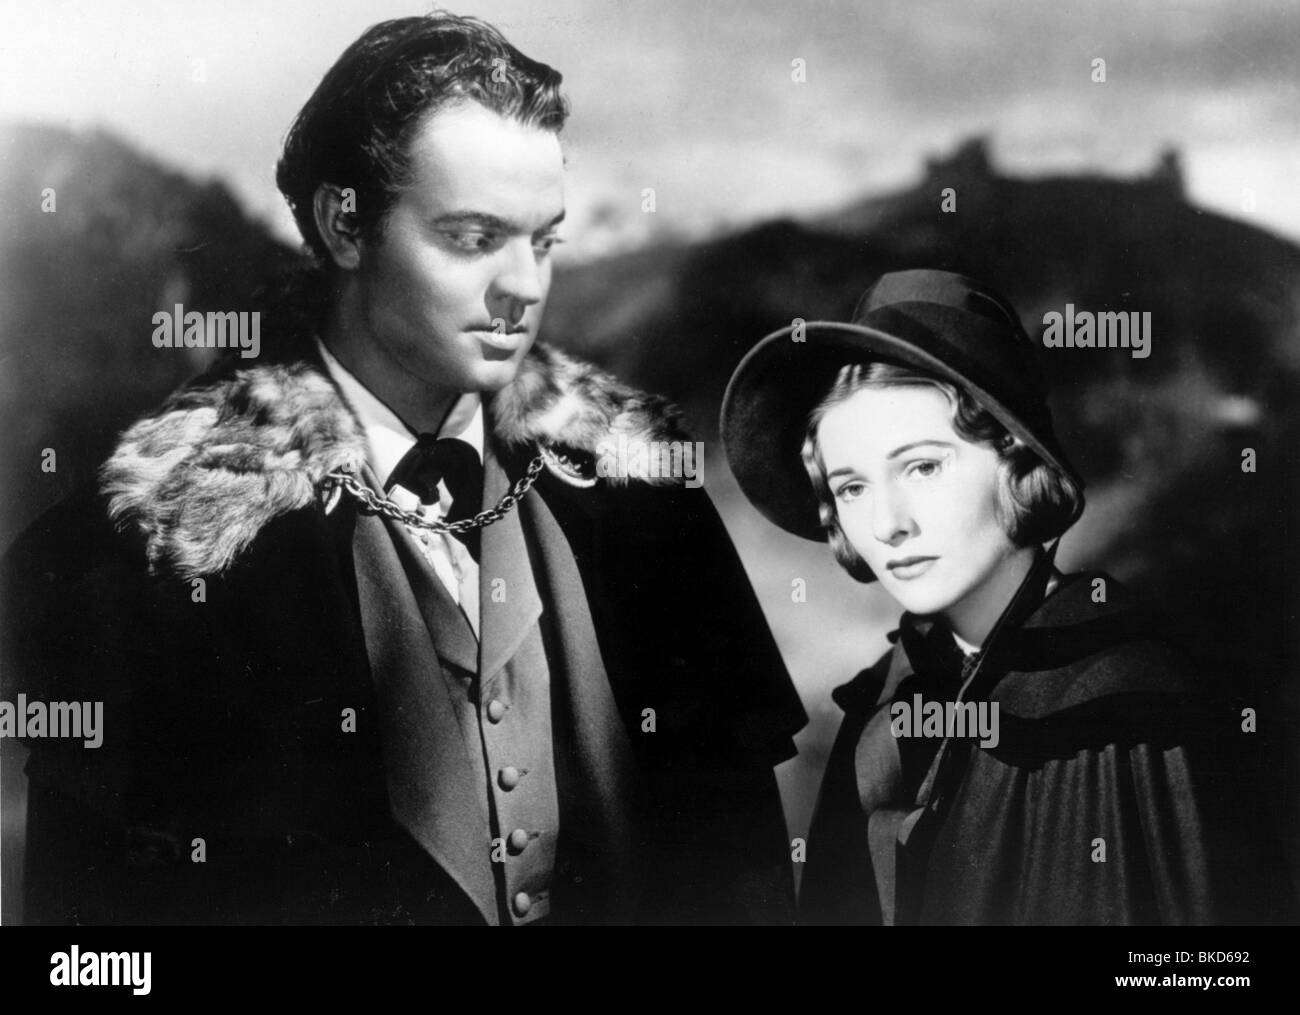 JANE EYRE (1943) ORSON WELLES, JOAN FONTAINE JEY 001 P Stockfoto